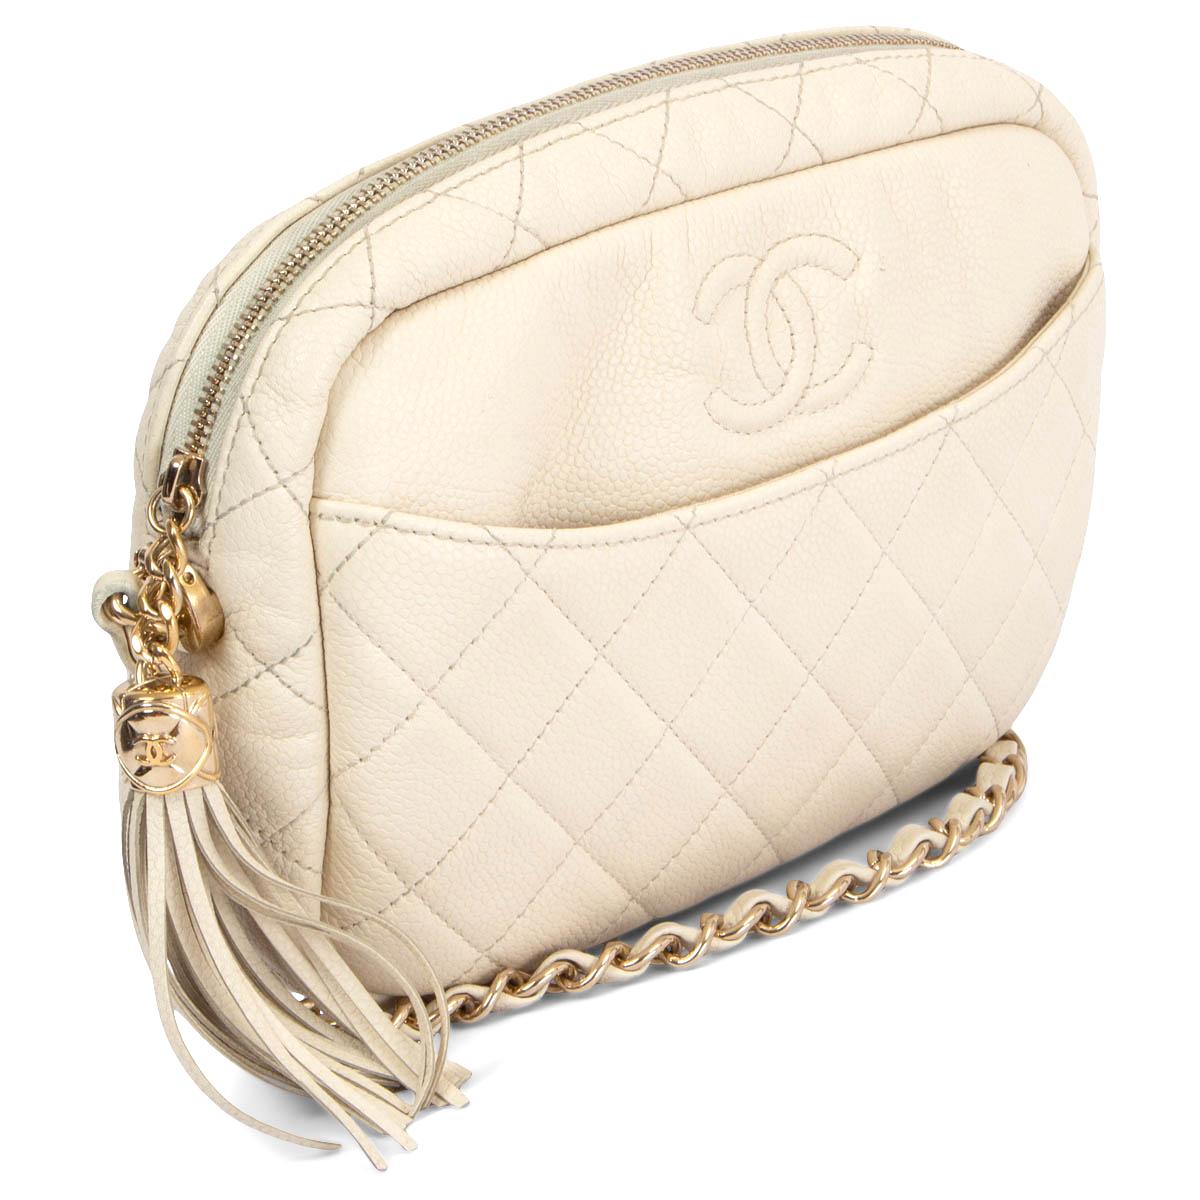 100% authentic Chanel Coco Tassel Camera shoulder bag in quilted ivory Caviar leather and light gold-tone hardware with one open front pocket. Opens with a tassel zipper on top and is lined in pale beige grosgrain fabric with one zipper pocket